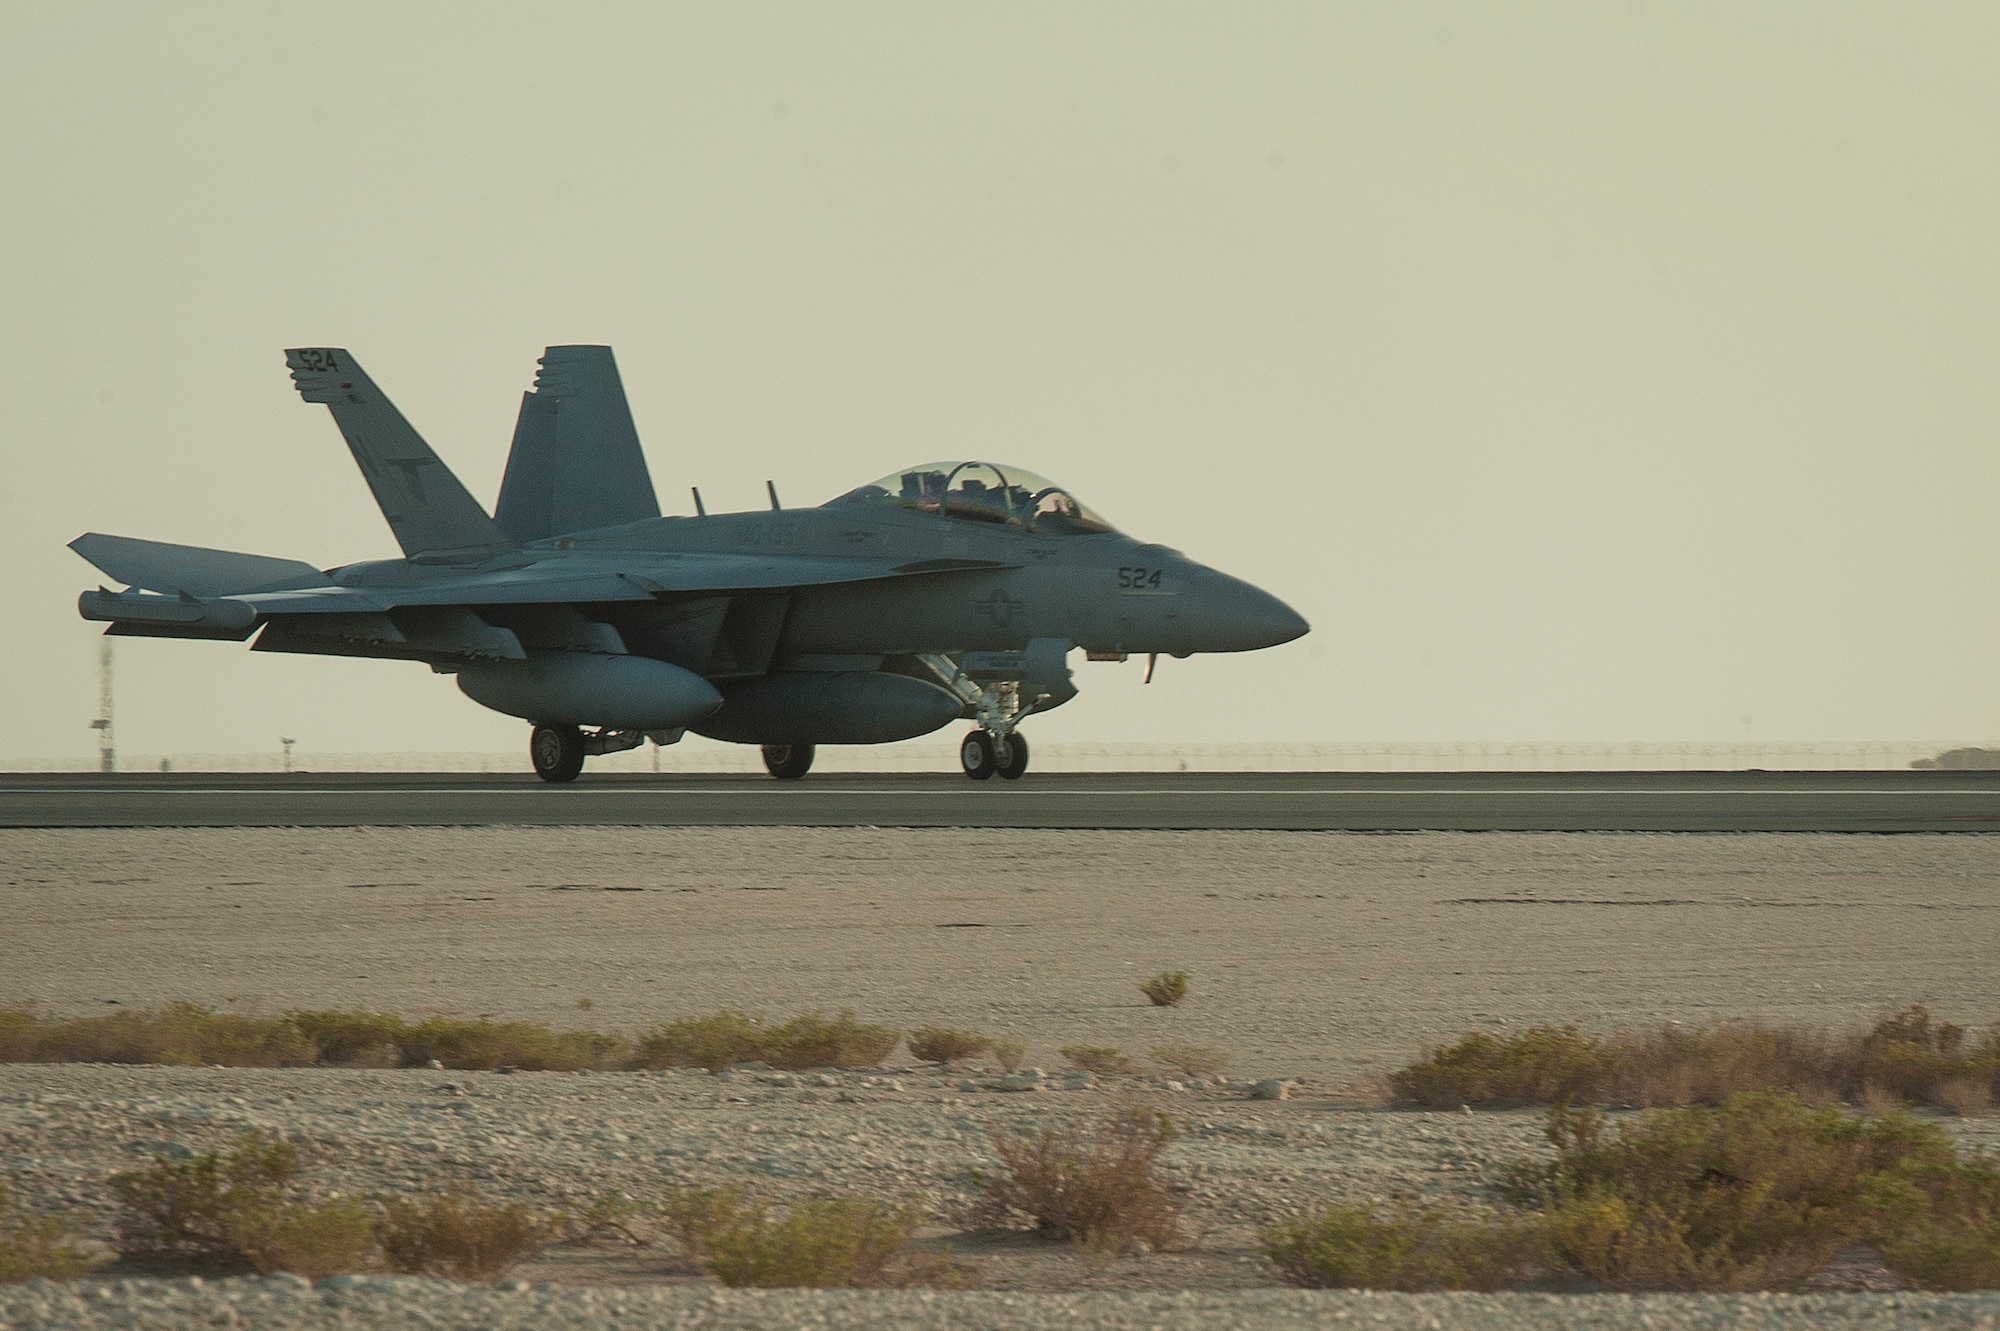 An EA-18G Growler assigned to the Electronic Attack Squadron 135 (VAQ-135) “Black Ravens” arrives at Al Udeid Air Base, Qatar, Oct. 30, 2018. The electronic warfare aircraft has electronic attack, jamming, and satellite communication capabilities as well as communication countermeasures. VAQ-135 will replace VMAQ-2, which operated EA-6B Prowlers. VAQ-135 is deployed to the U.S. 5th Fleet area of operations in support of naval operations to ensure maritime stability and security in the Central Region, connecting the Mediterranean and the Pacific through the western Indian Ocean and three strategic choke points. (U.S. Air Force photo by Tech. Sgt. Christopher Hubenthal)